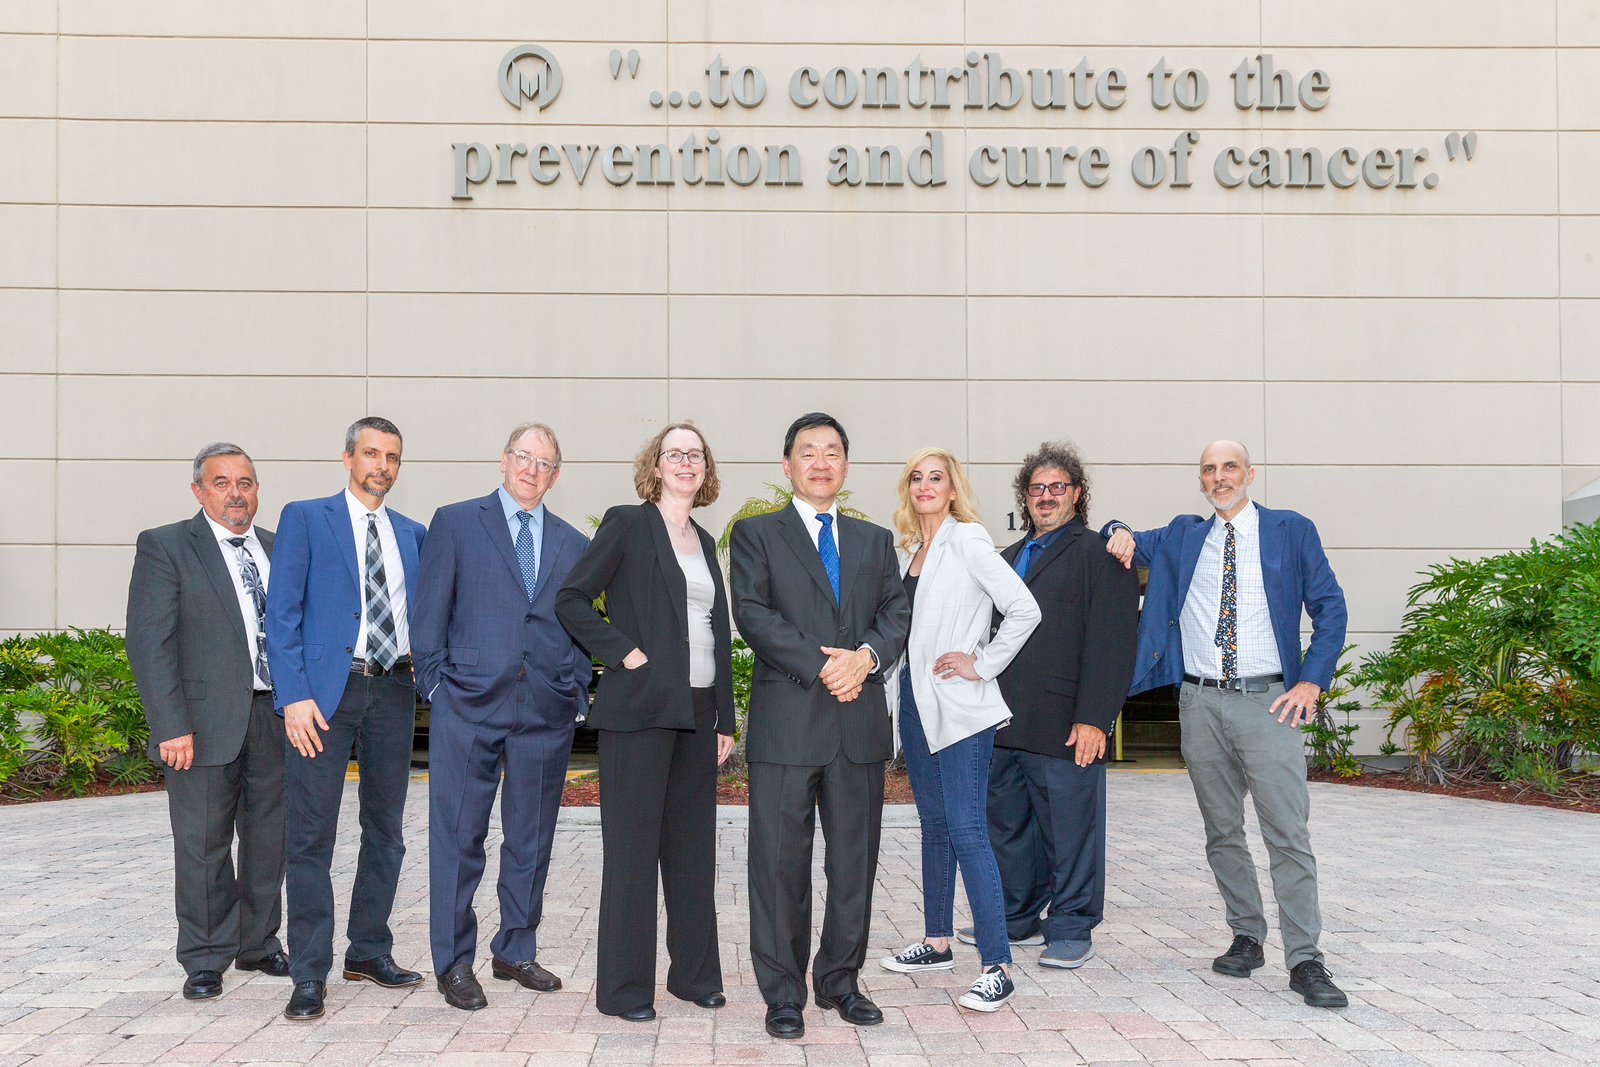 The ReMissions in front of Moffitt Cancer Center